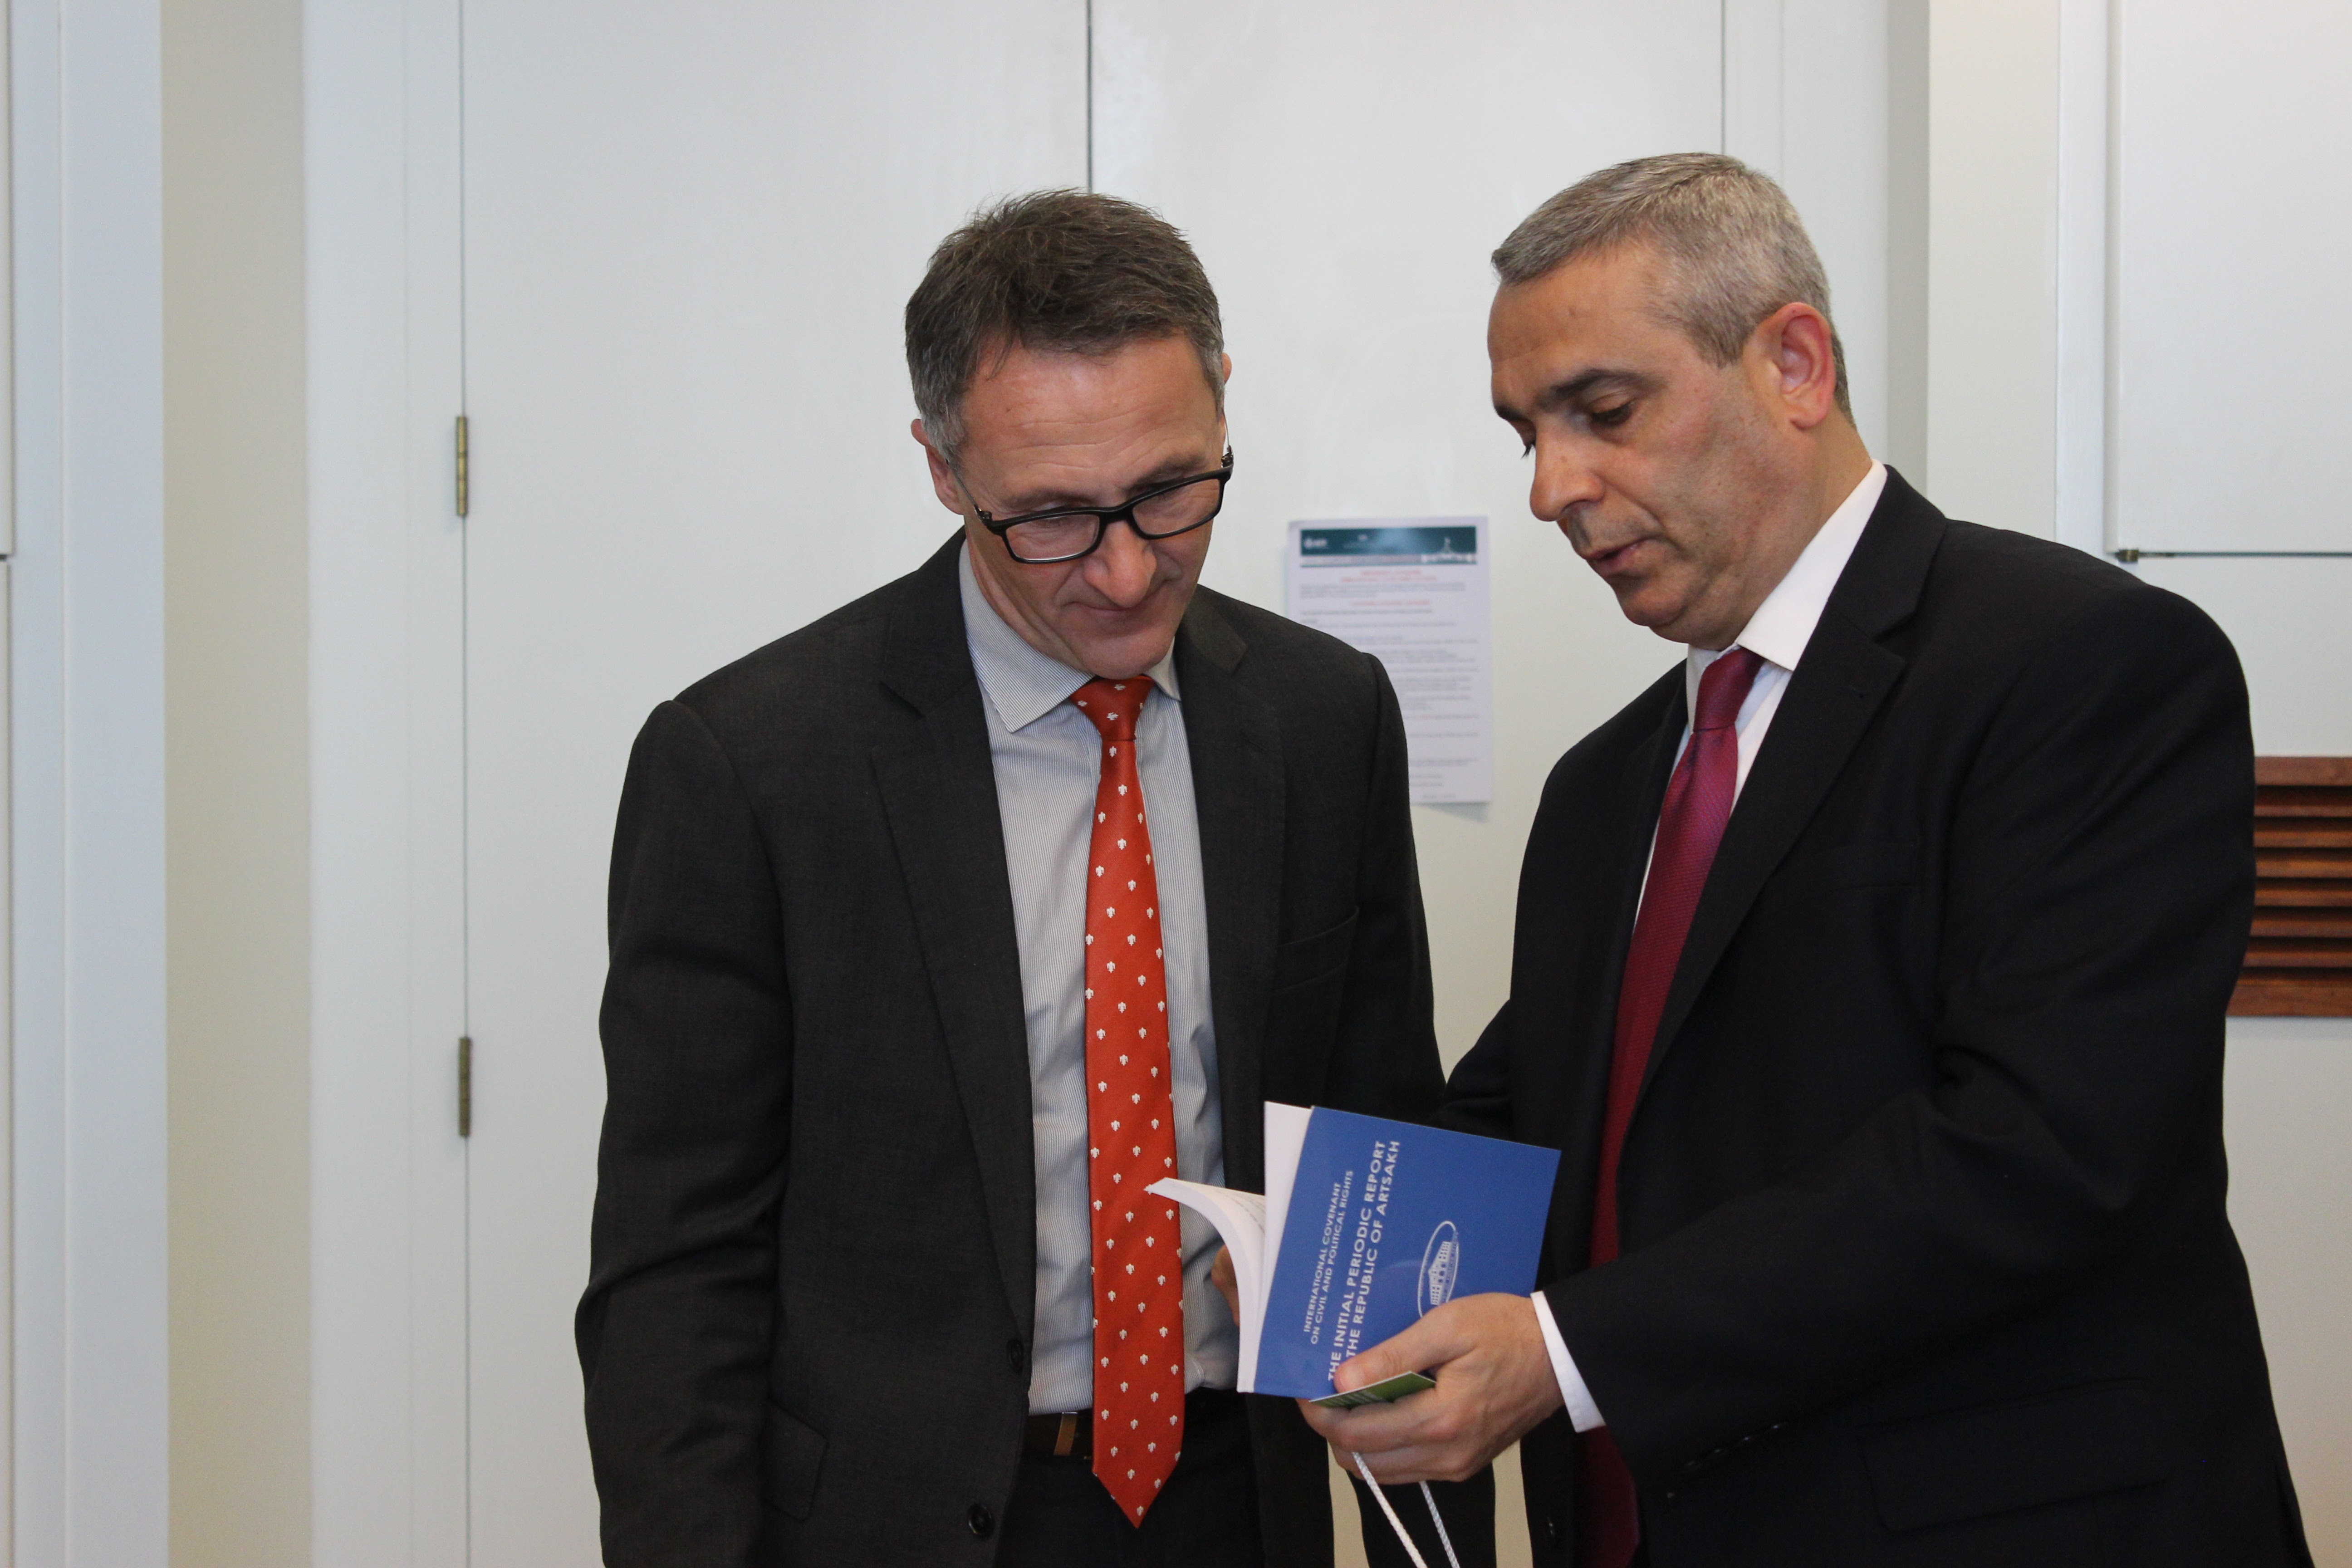 Artsakh Foreign Minister Masis Mayilian Met with Leader of the Australian Greens Party, Senator Richard Di Natale